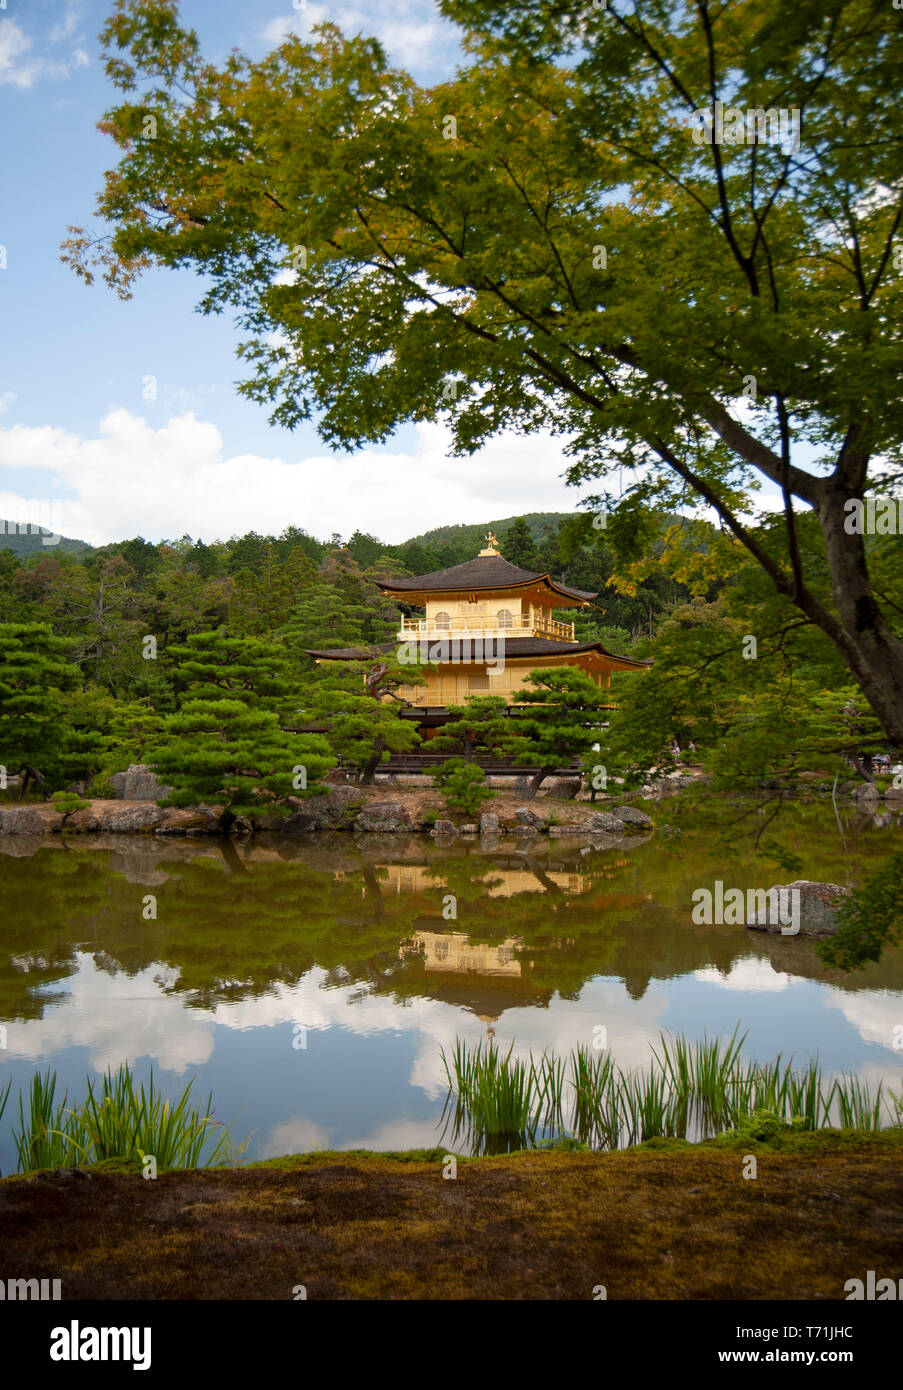 Kinkaku-Ji or the Temple of the Golden Pavilion. A Zen Buddhist temple surrounded by beautiful pools, trees and gardens in Kyoto Japan. Stock Photo